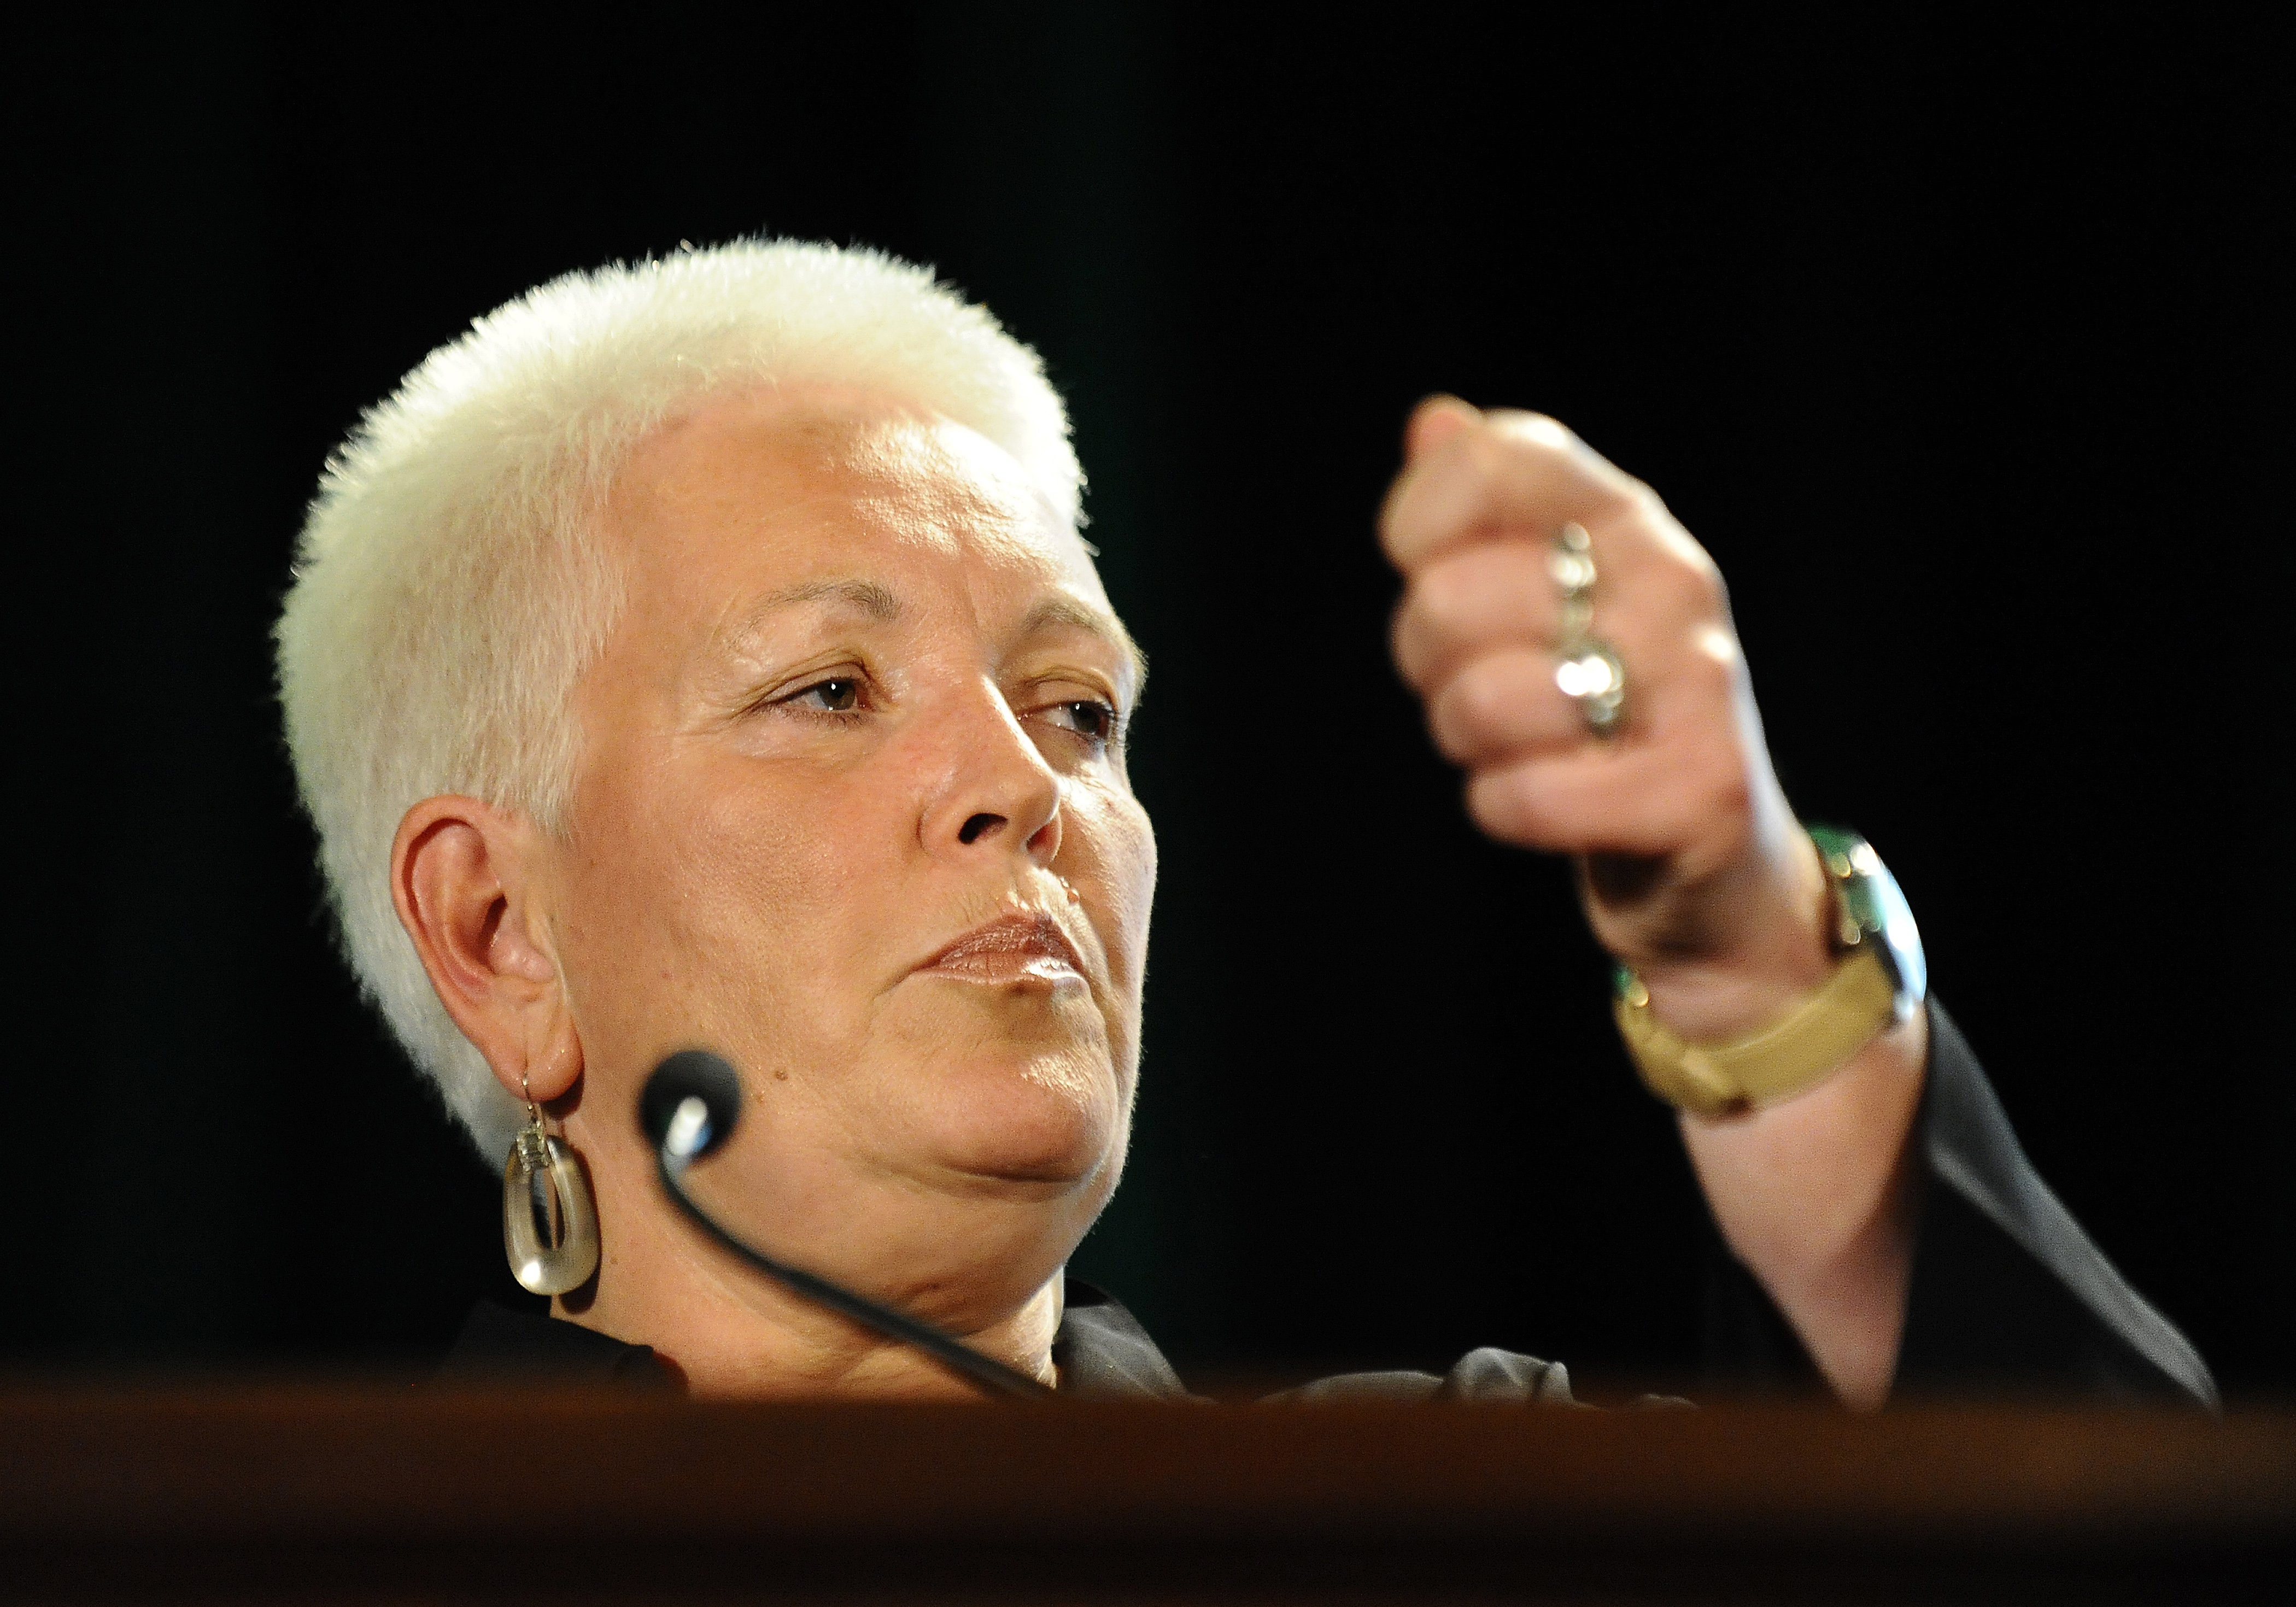 Gayle Smith, special assistant to President Obama and senior director at the National Security Council, speaks during the Society for International Development (SID) World Congress in Washington, DC